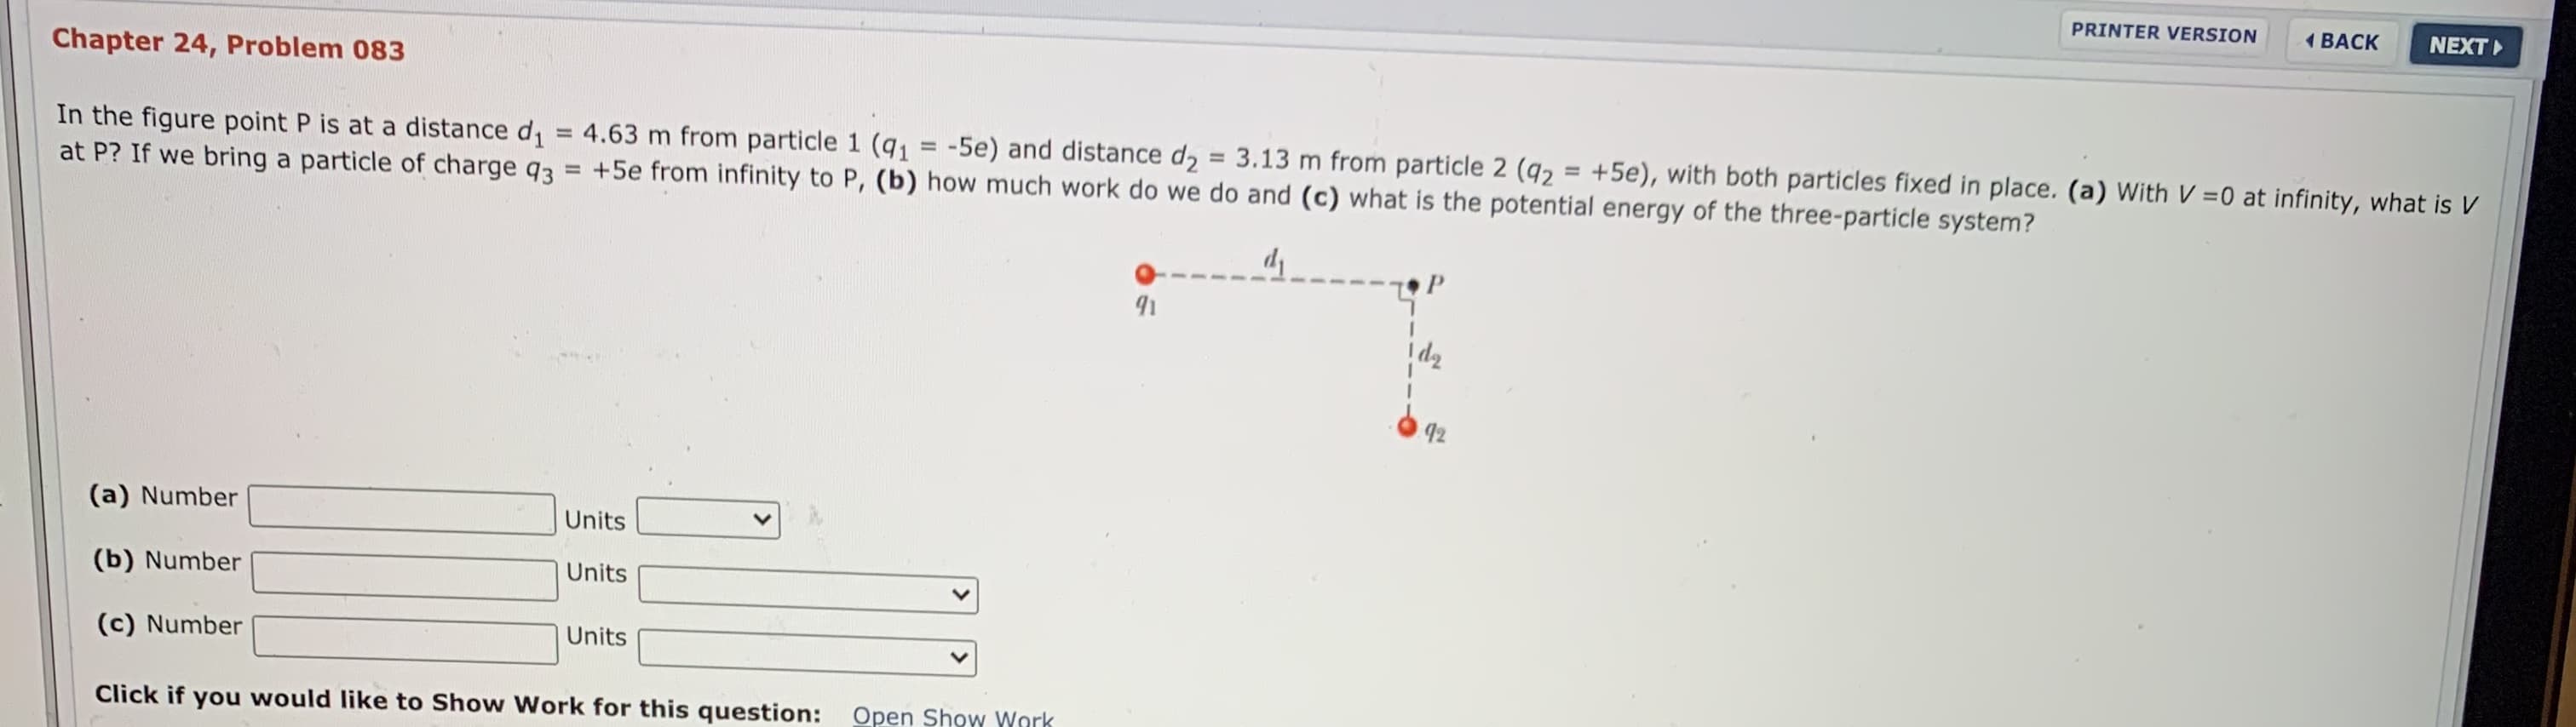 In the figure point P is at a distance d = 4.63 m from particle 1 (q = -5e) and distance d = 3.13 m from particle 2 (q2 = +5e), with both particles fixed in place. (a) With V =0 at infinity, what is V
at P? If we bring a particle of charge q3 = +5e from infinity to P, (b) how much work do we do and (c) what is the potential energy of the three-particle system?
%3D
%3D
92
(a) Number
Units
(b) Number
